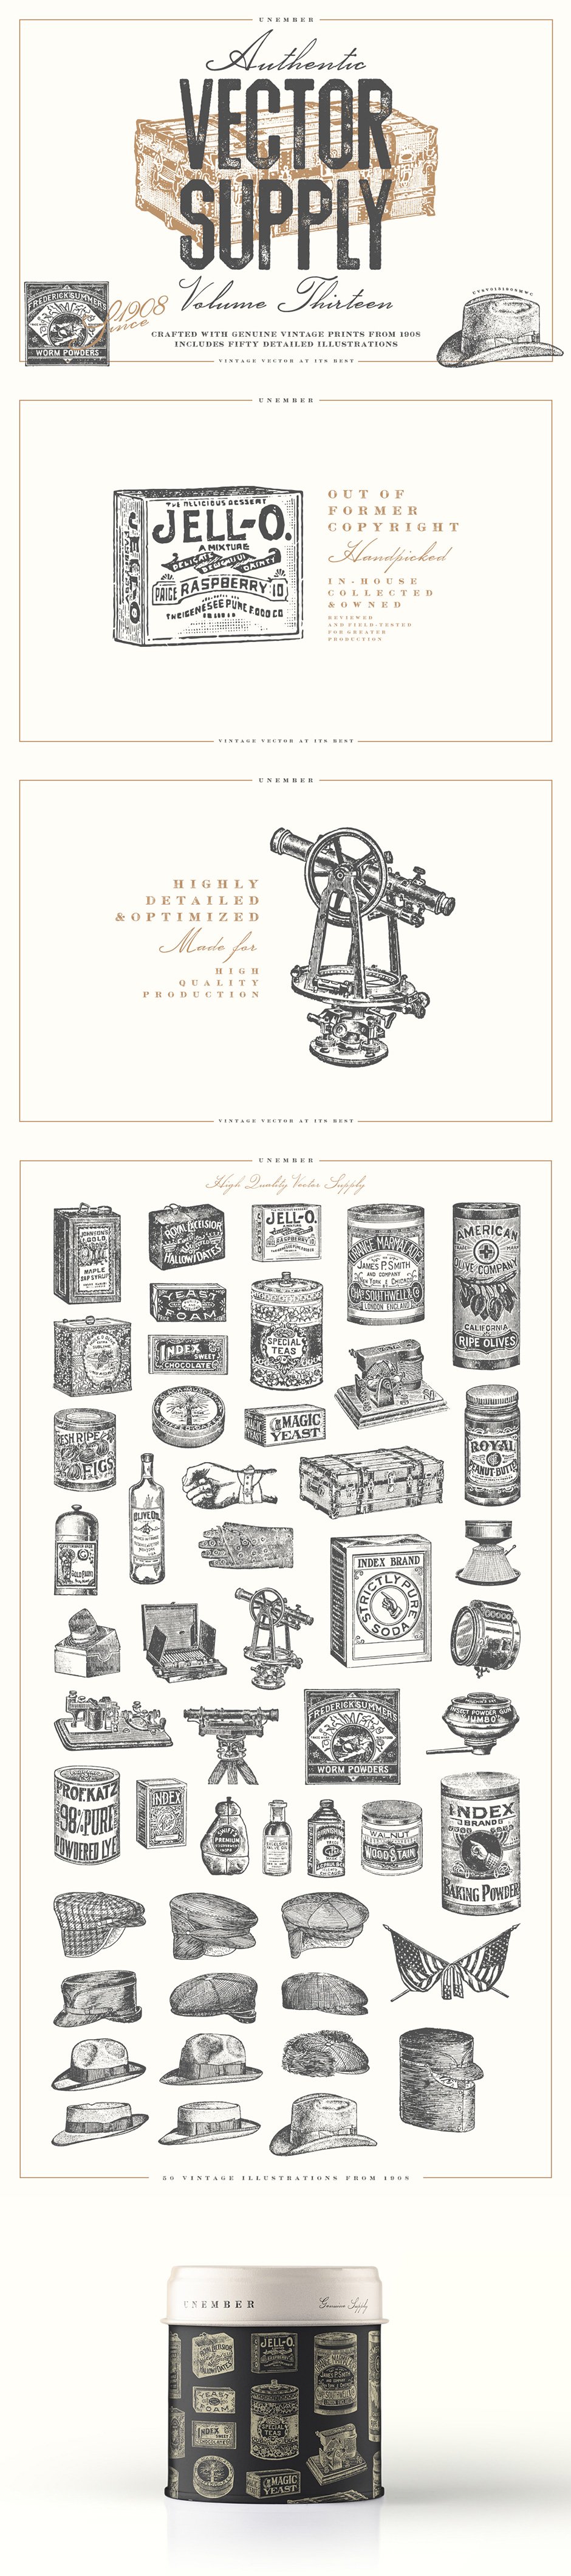 The Extensive Vector Elements Collection